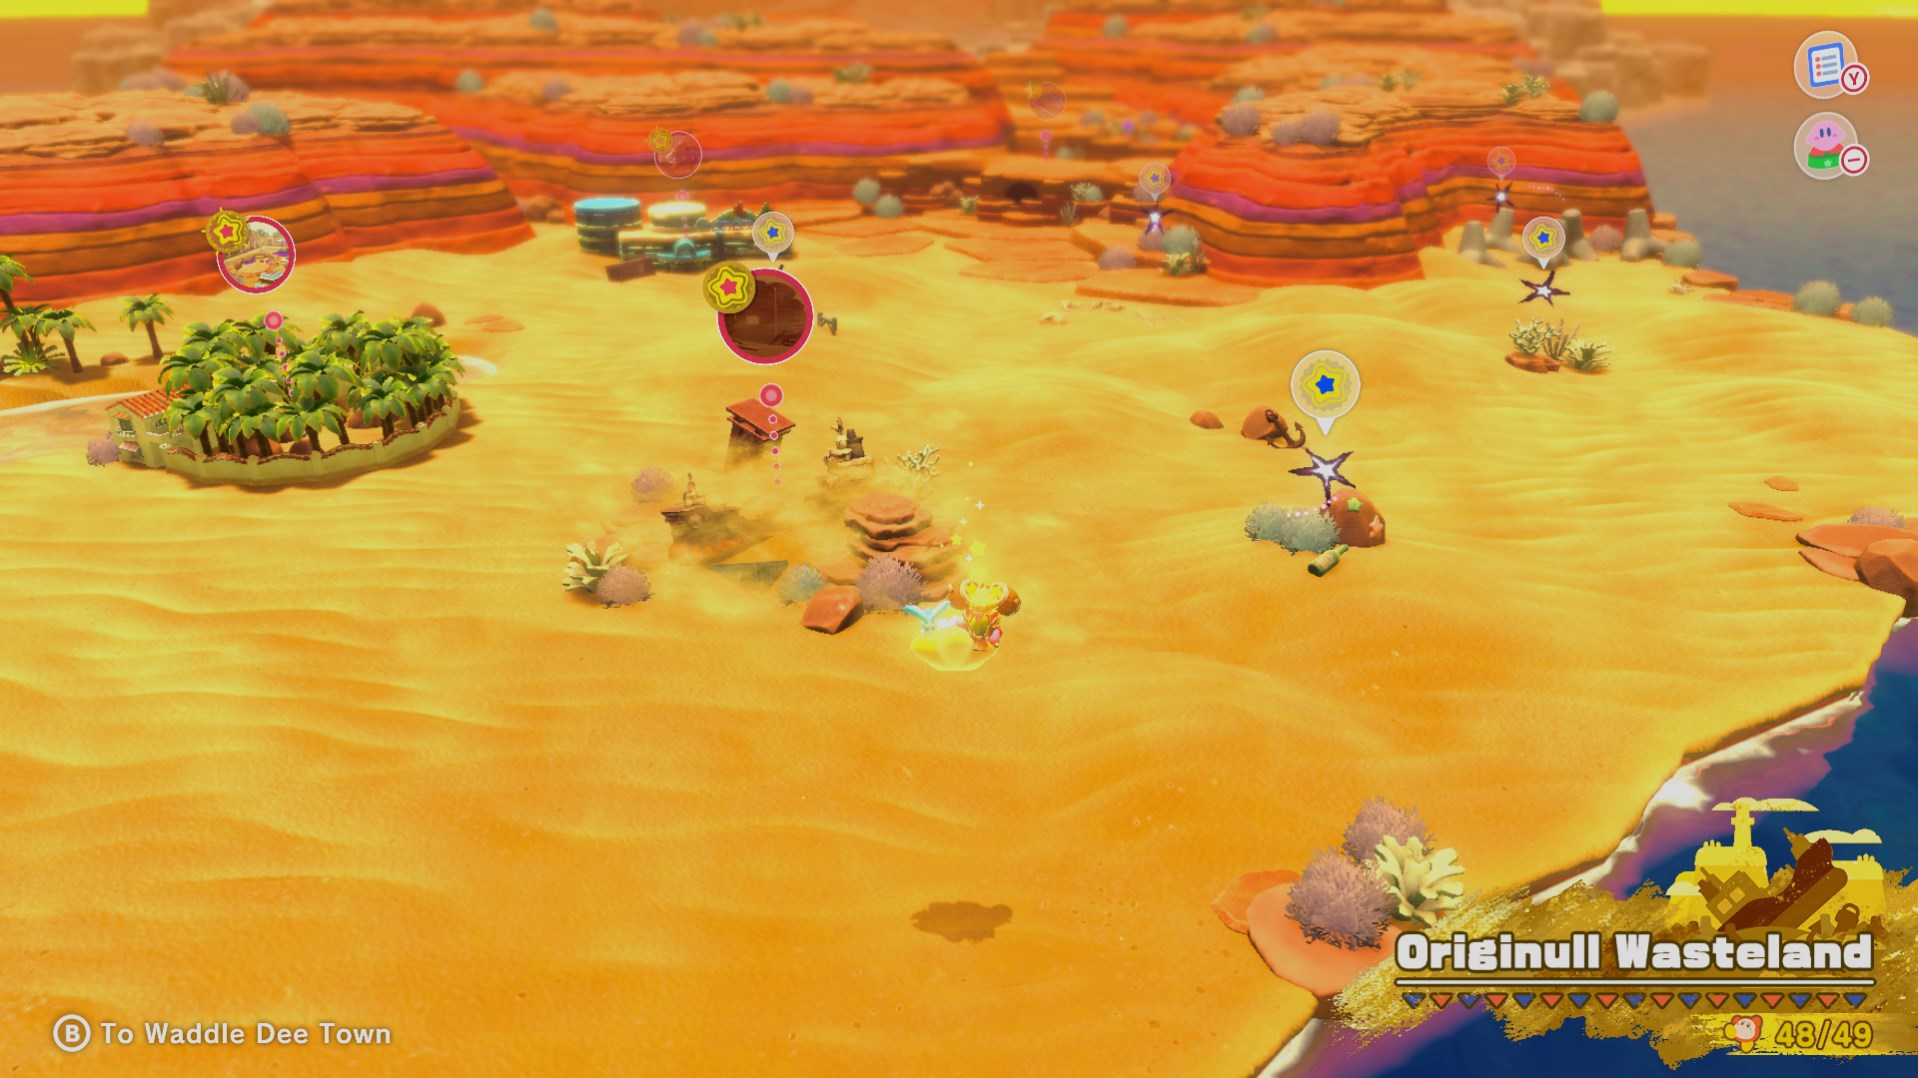 Kirby floats in his warp star over the Originull Wasteland